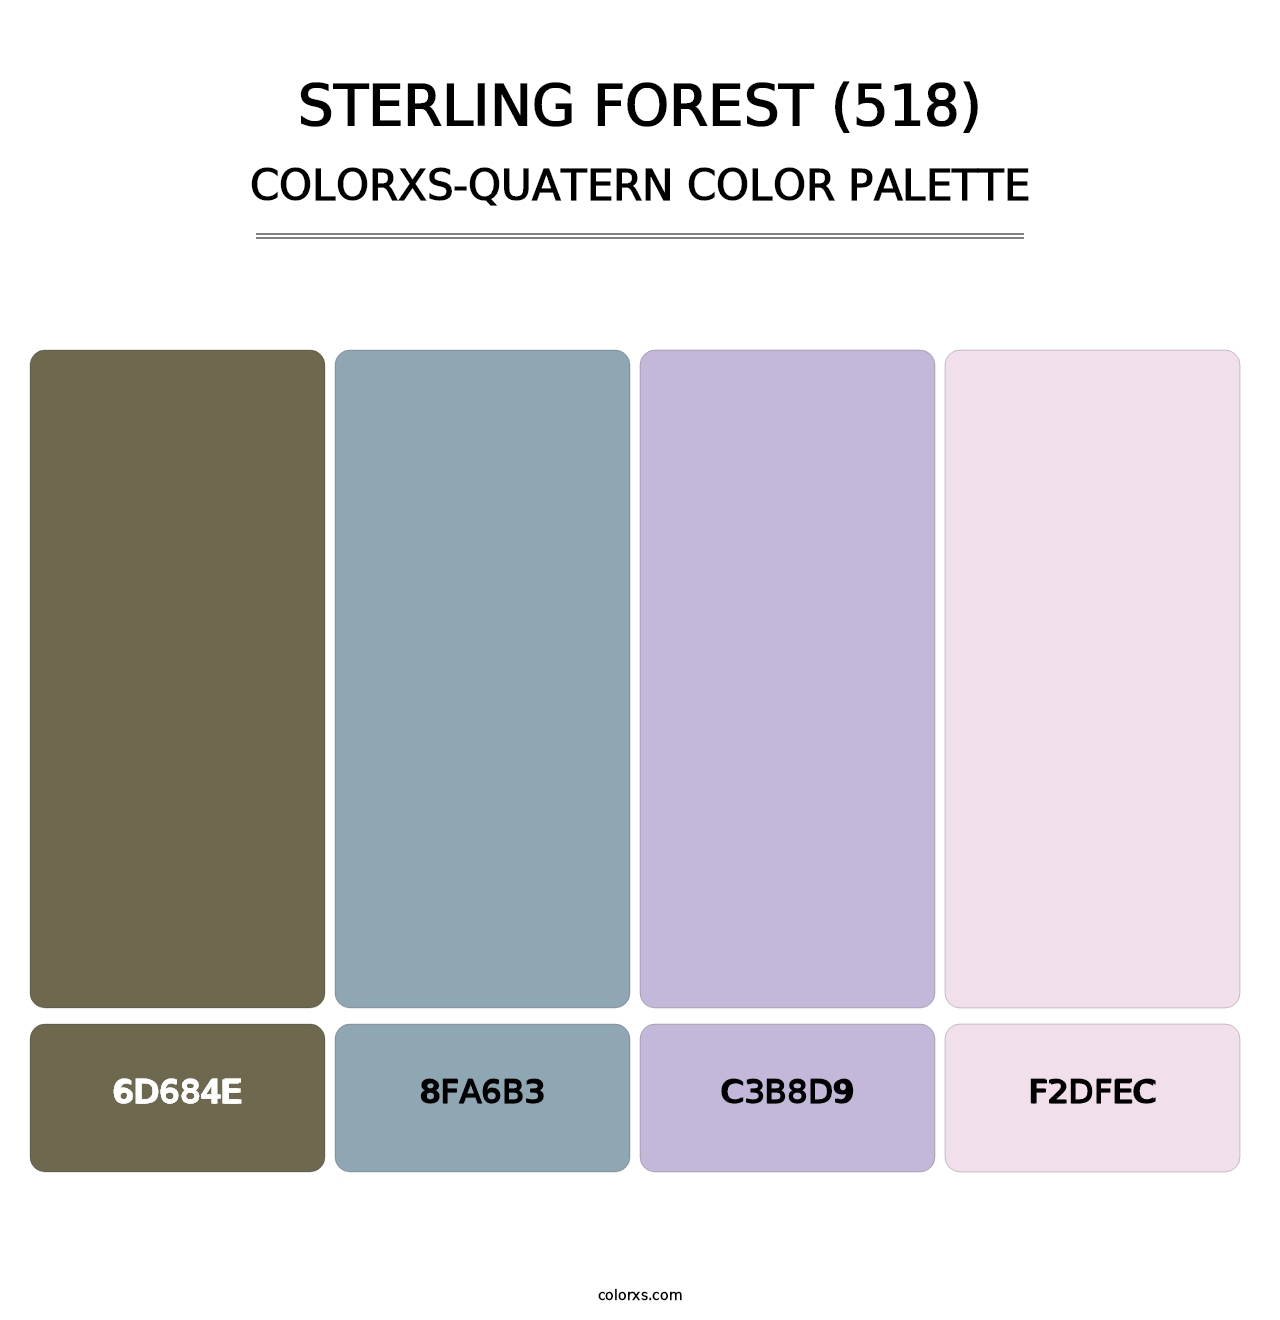 Sterling Forest (518) - Colorxs Quatern Palette